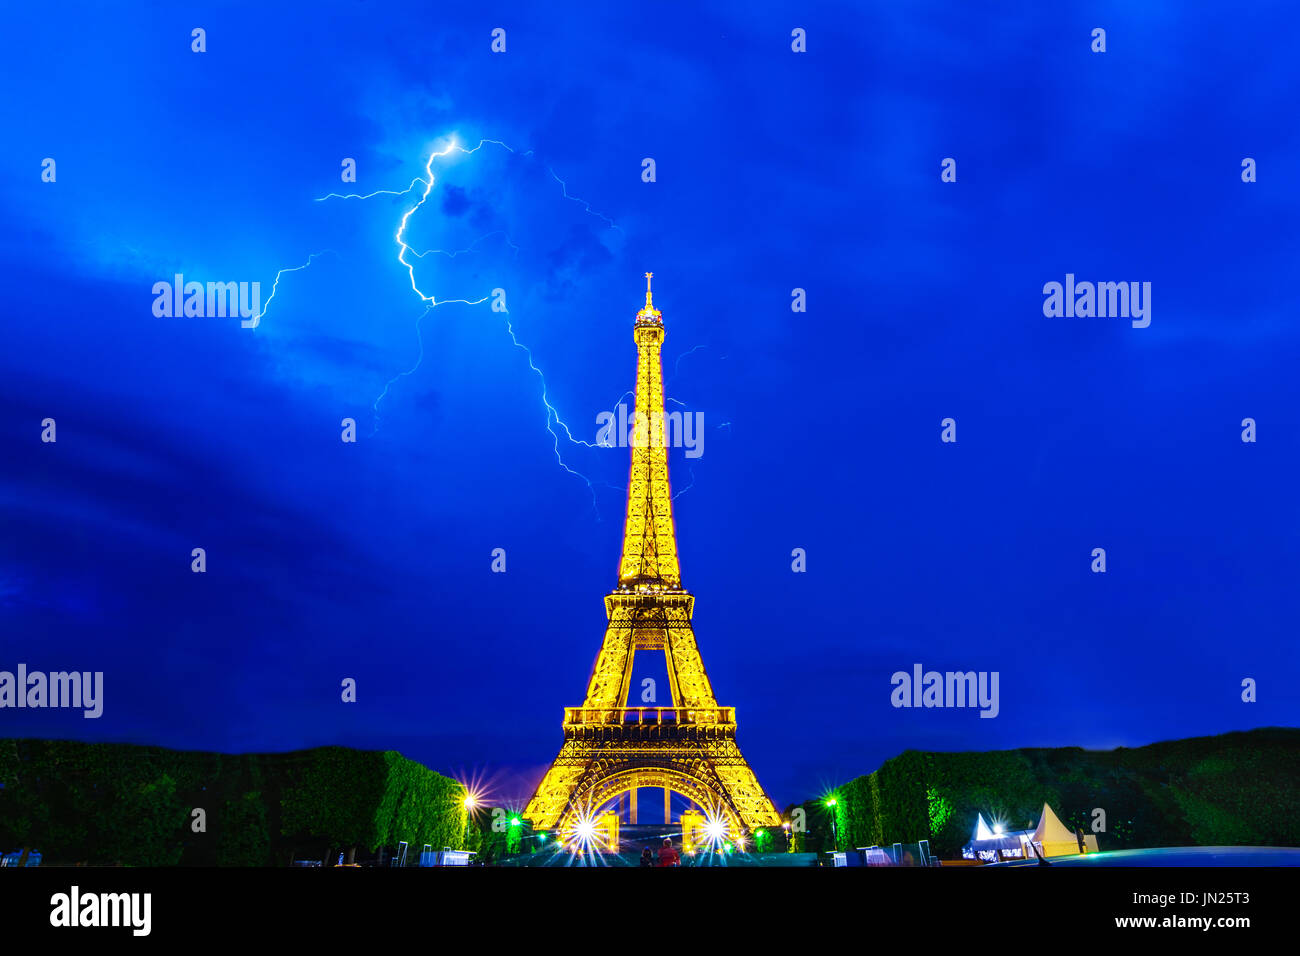 Paris, France - June 8th, 2014: Thunderstorms behind Eiffel Tower illuminated at night-during Roland Garros tour. The Eiffel Tower was built in 1889,  Stock Photo